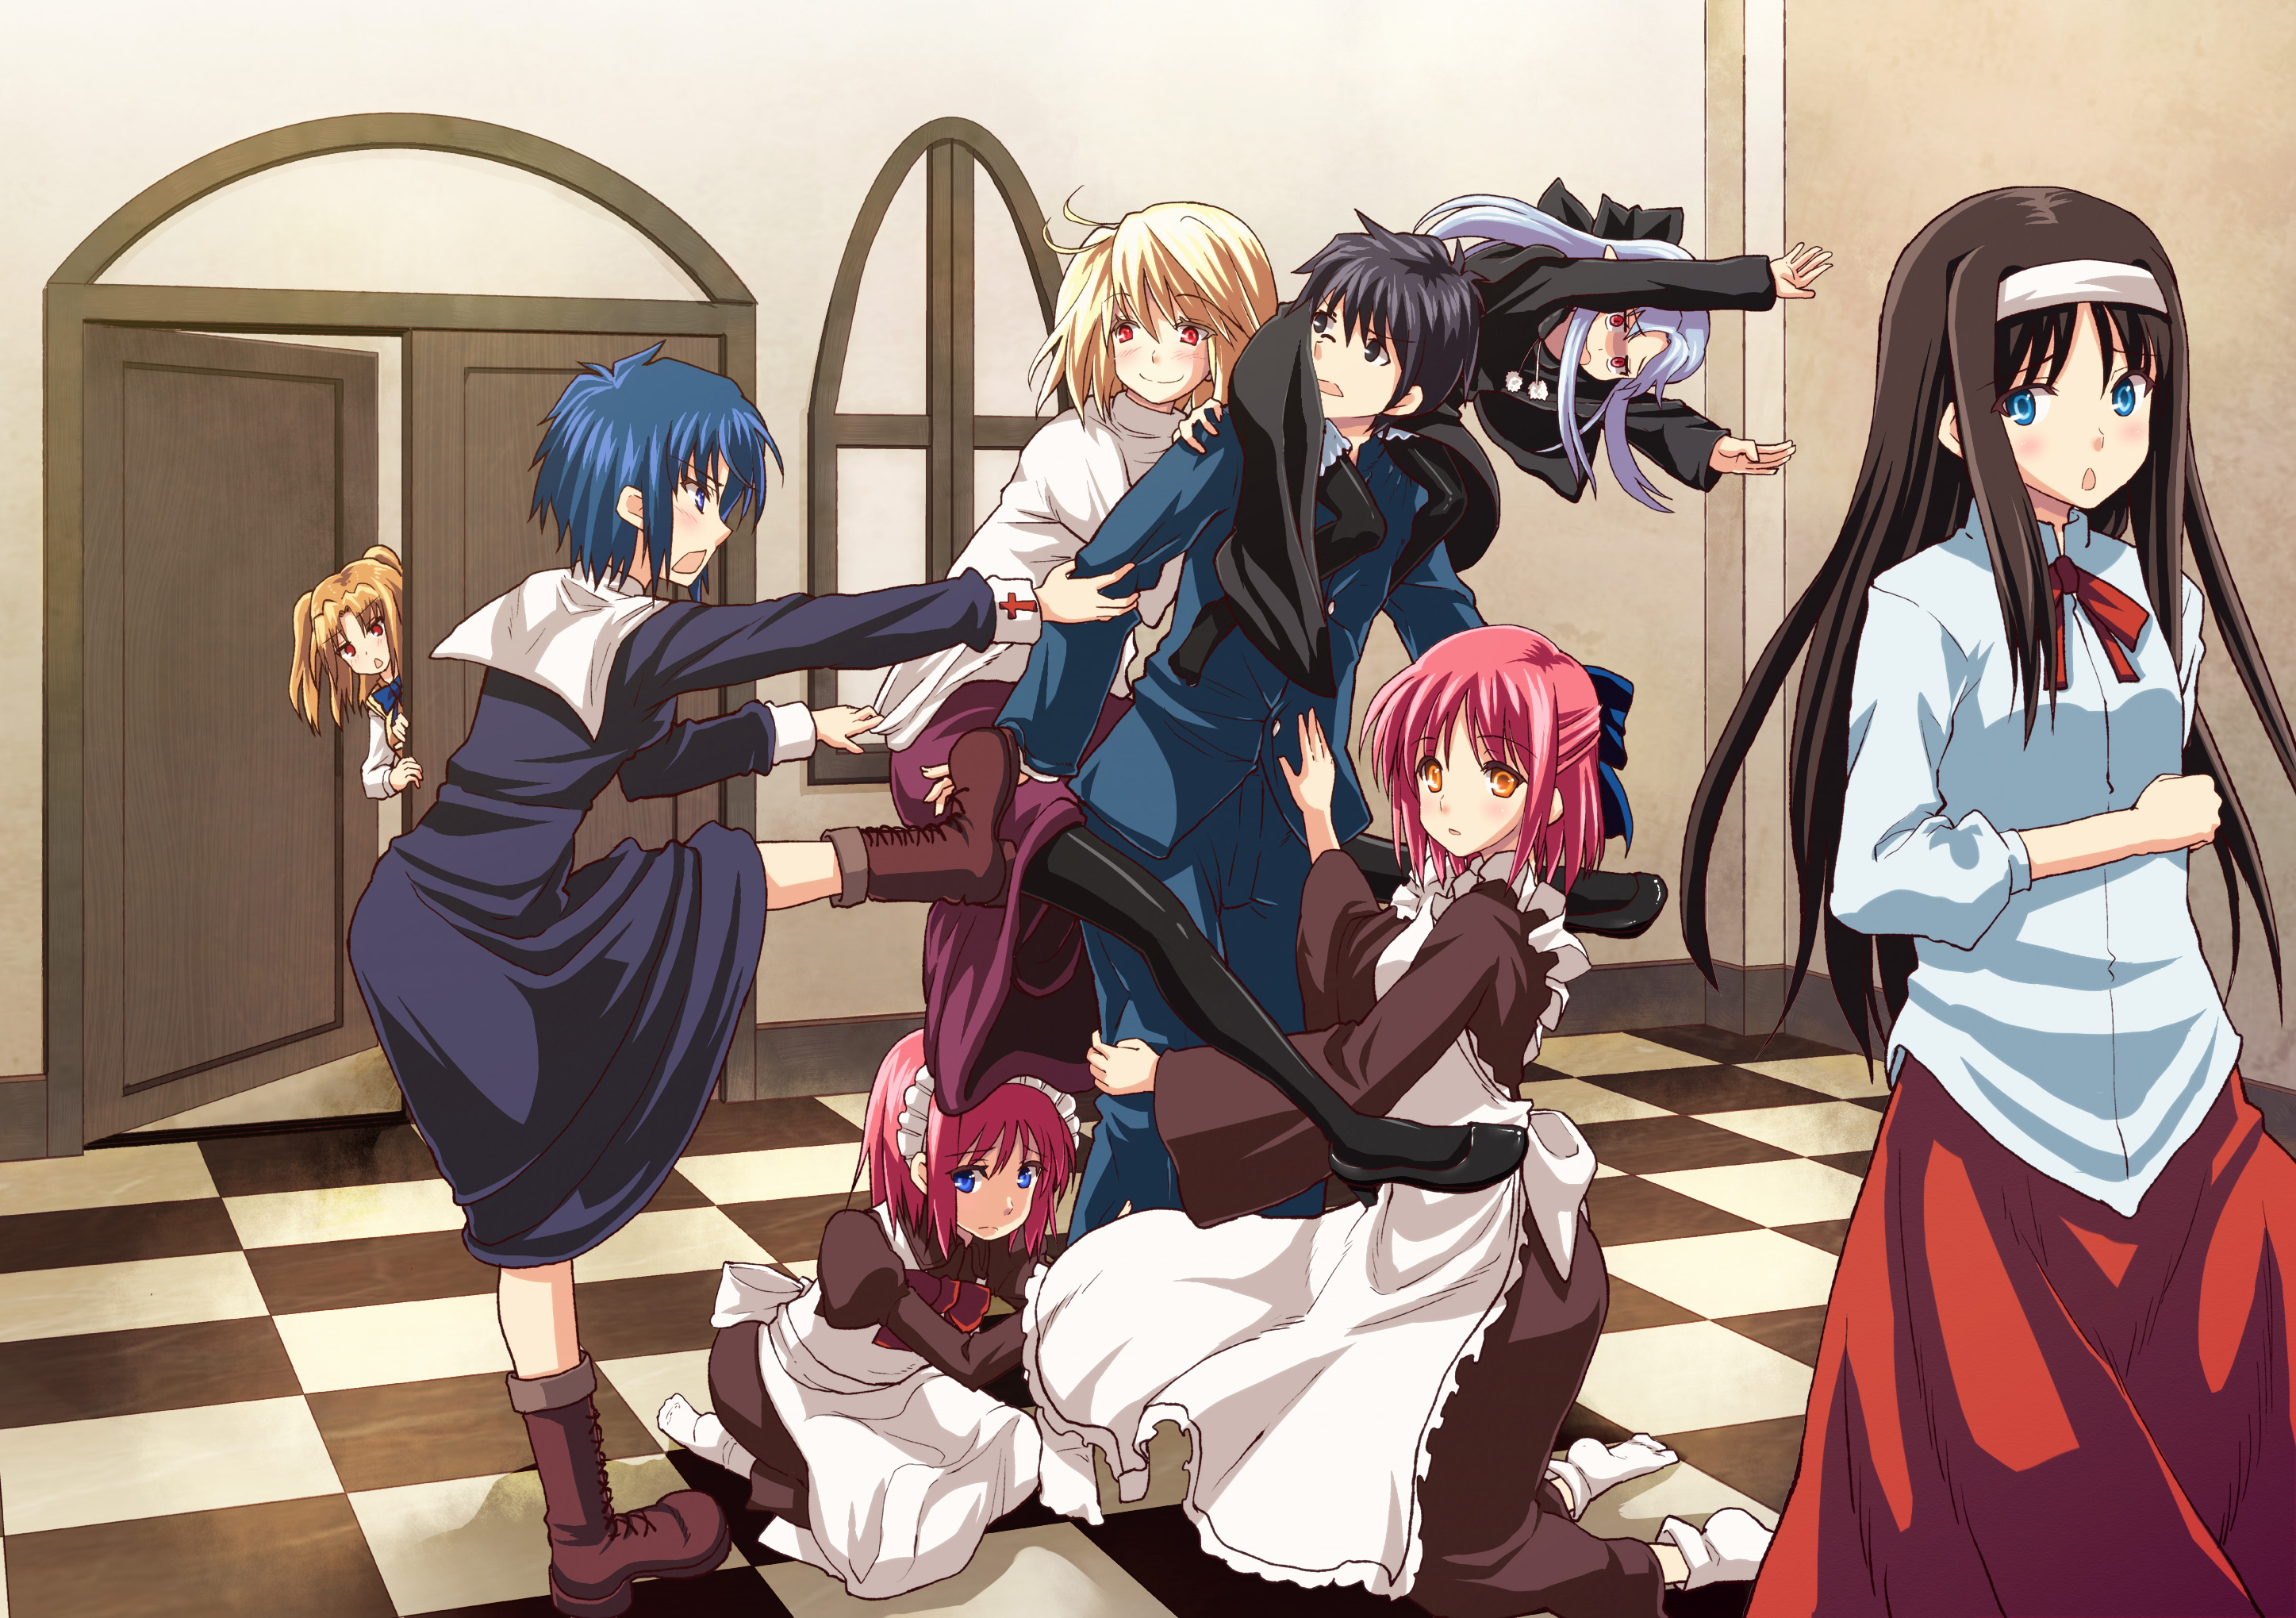 Melty Blood Hd Wallpaper Background Image 2894x2039 Id Images, Photos, Reviews